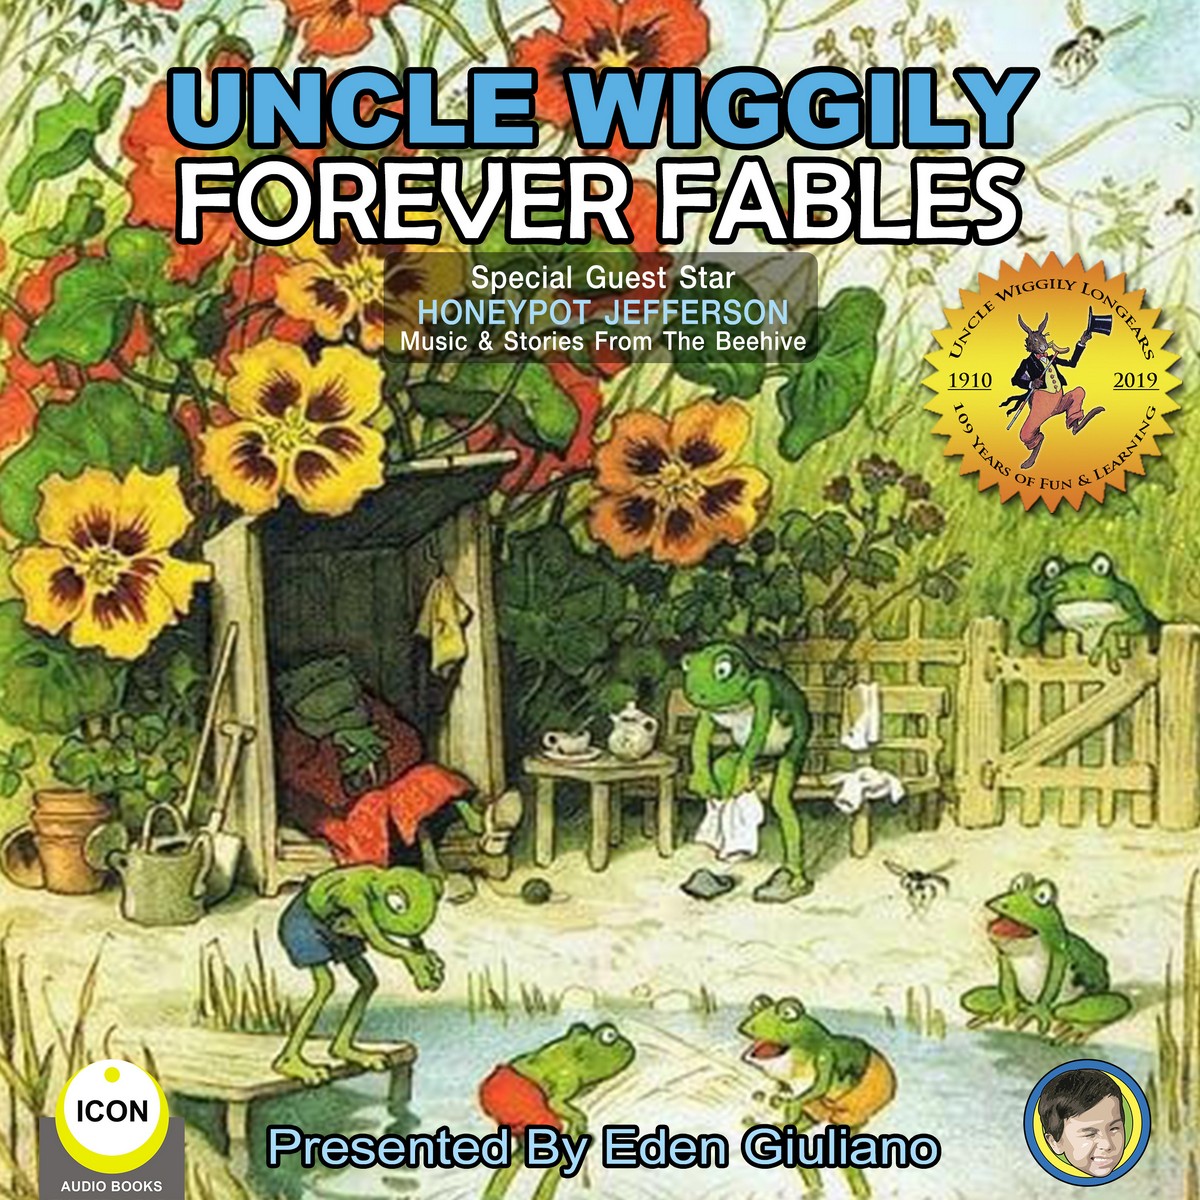 Uncle Wiggily Forever Fables